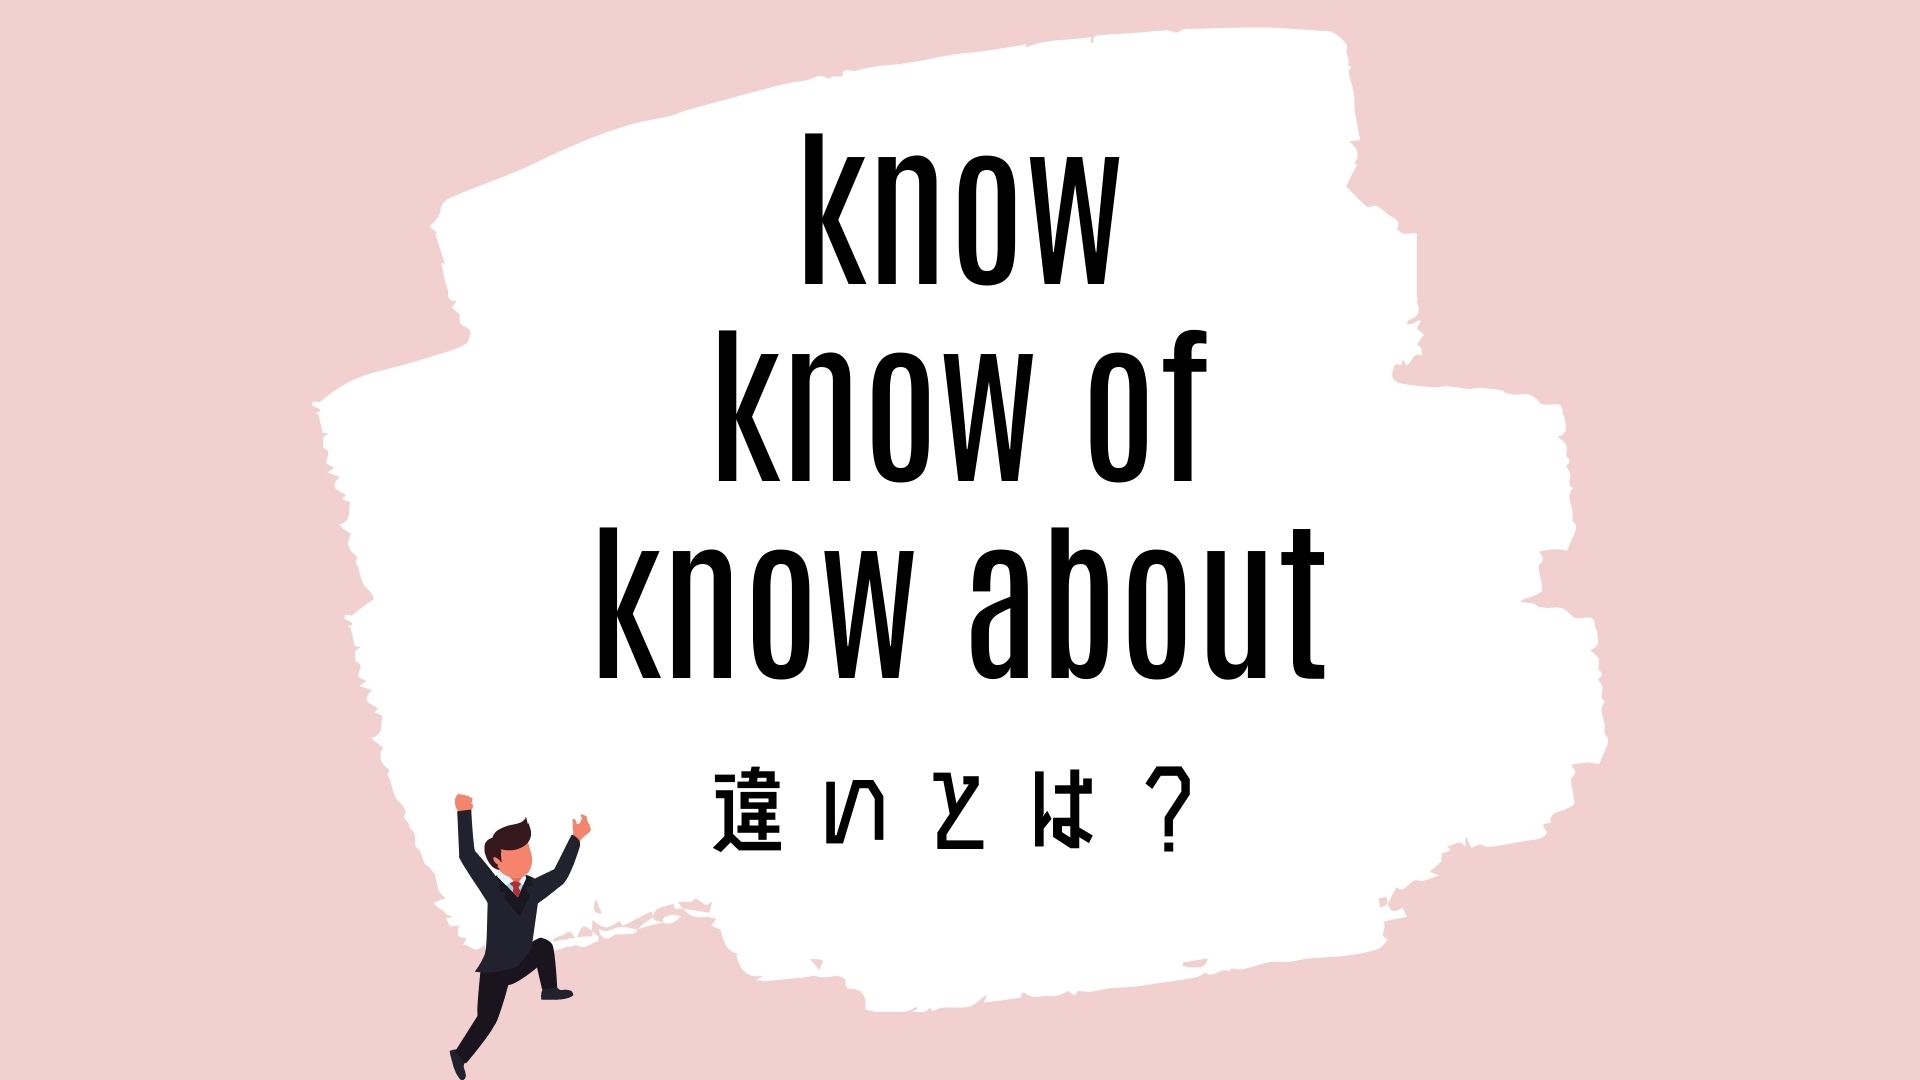 know / know of / know aboutの意味の違いとは？使い方を解説